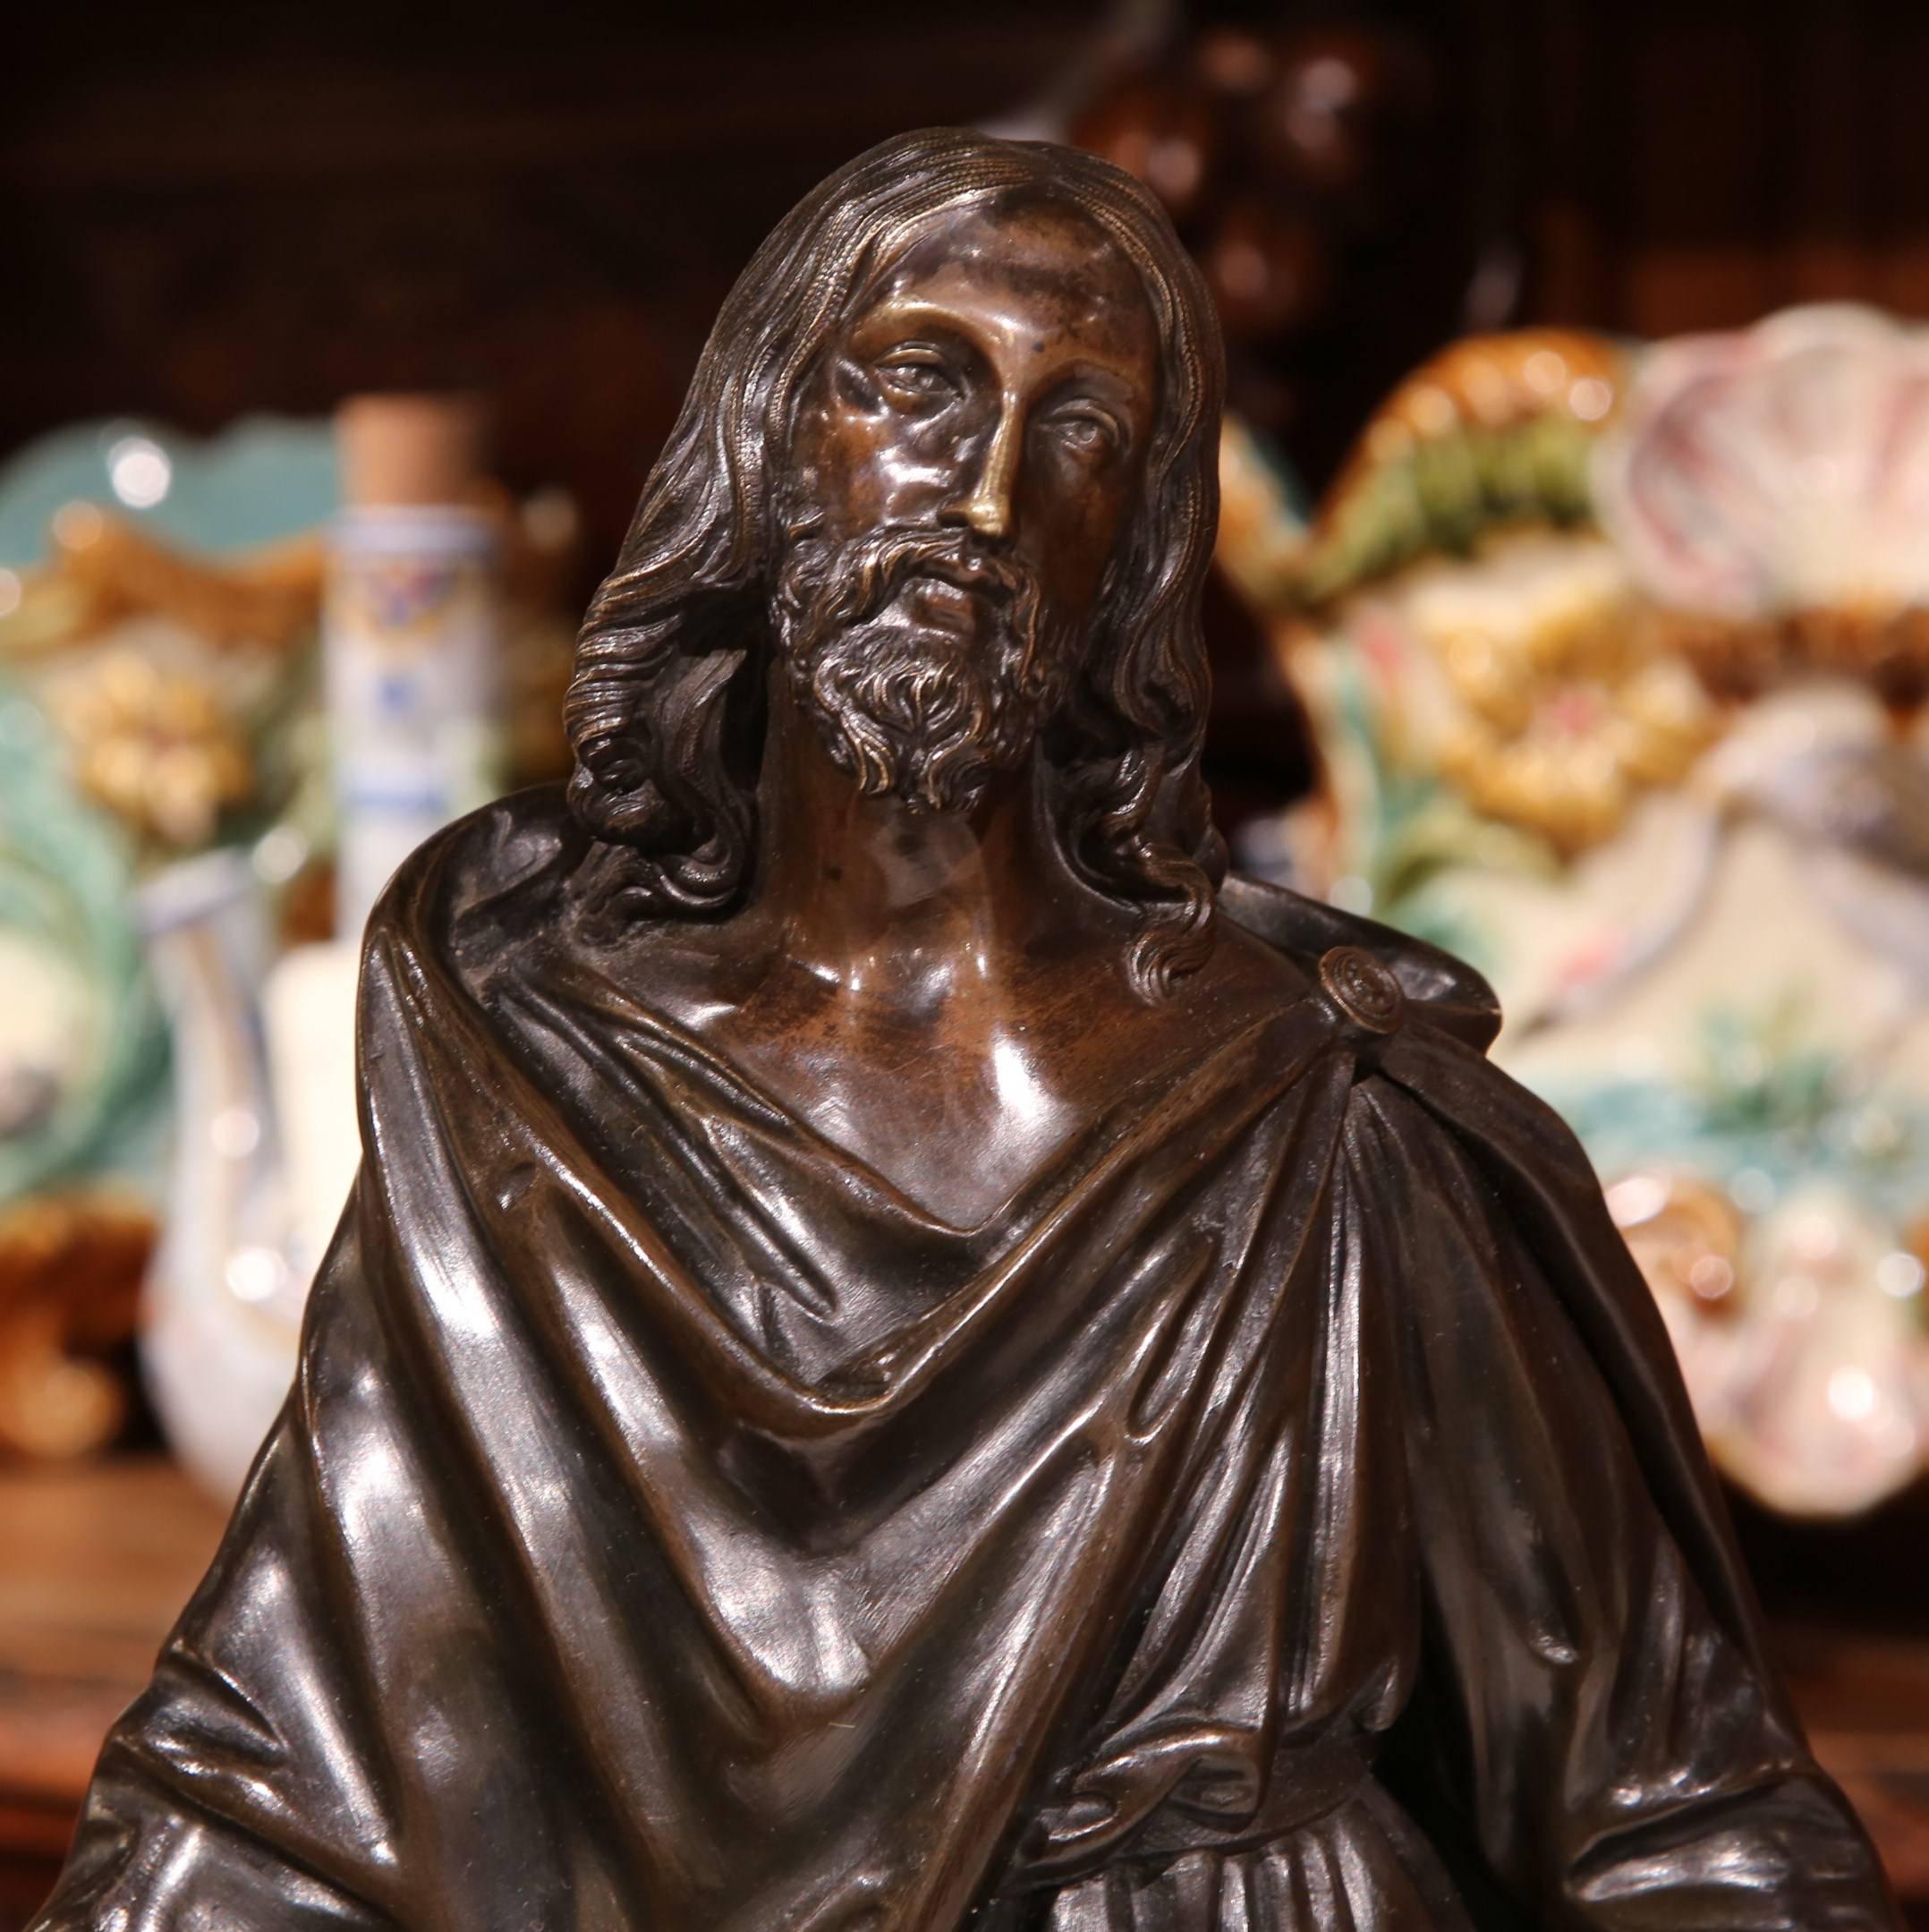 This large, antique bronze religious sculpture was crafted in France, circa 1870. The composition depicts our Lord Jesus Christ with open arms and praying; He is flanked by two knelling women in adoration at his feet. The traditional Christian